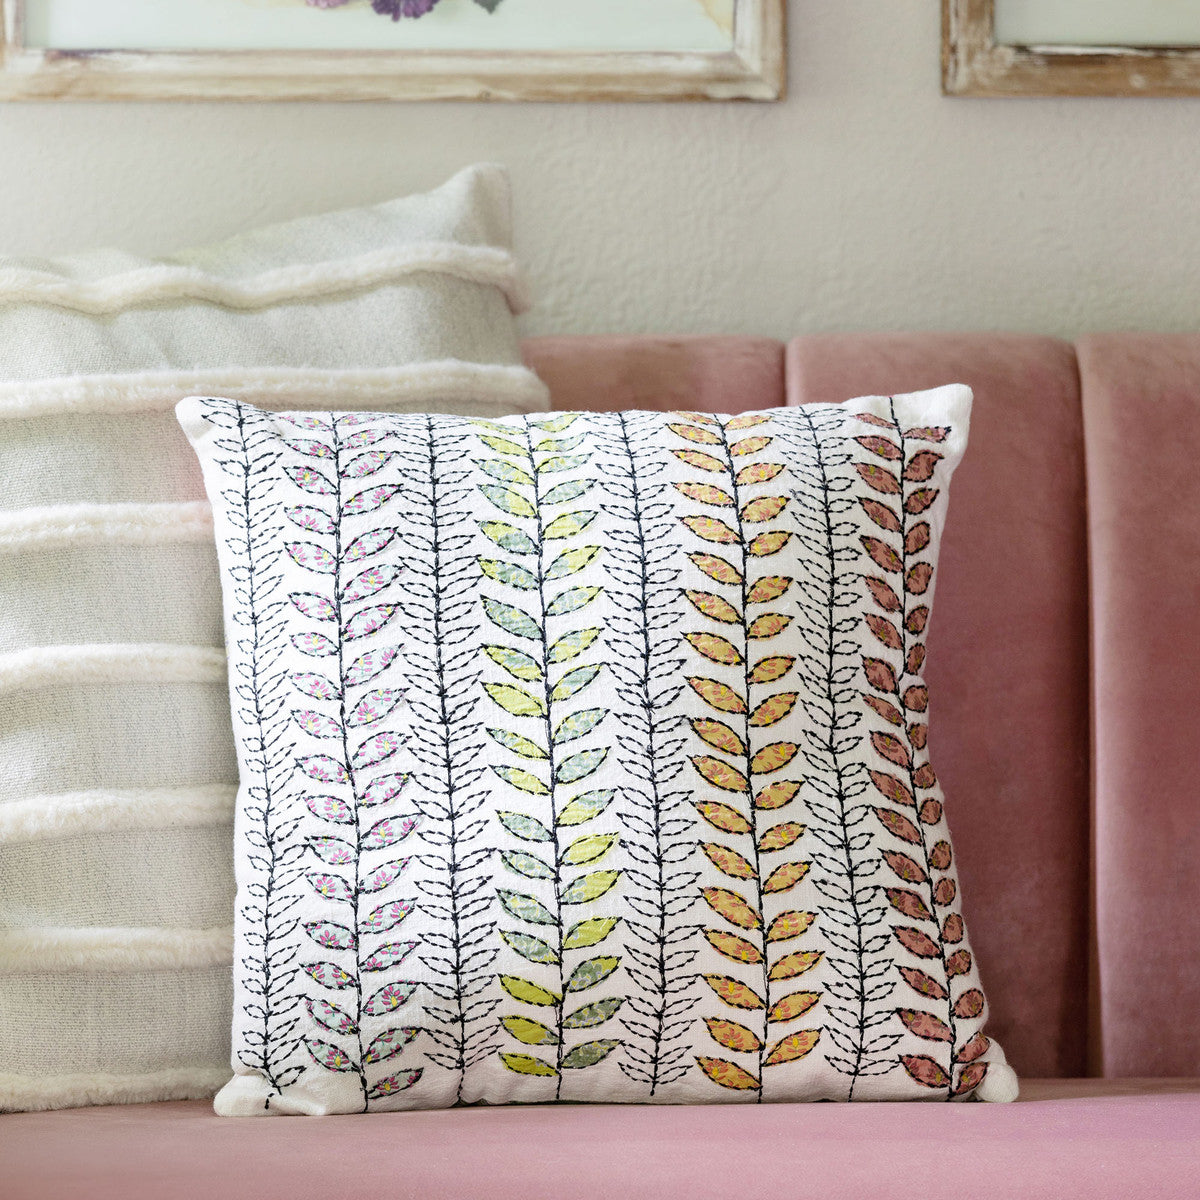 embroidered-vine-pattern-throw-pillow